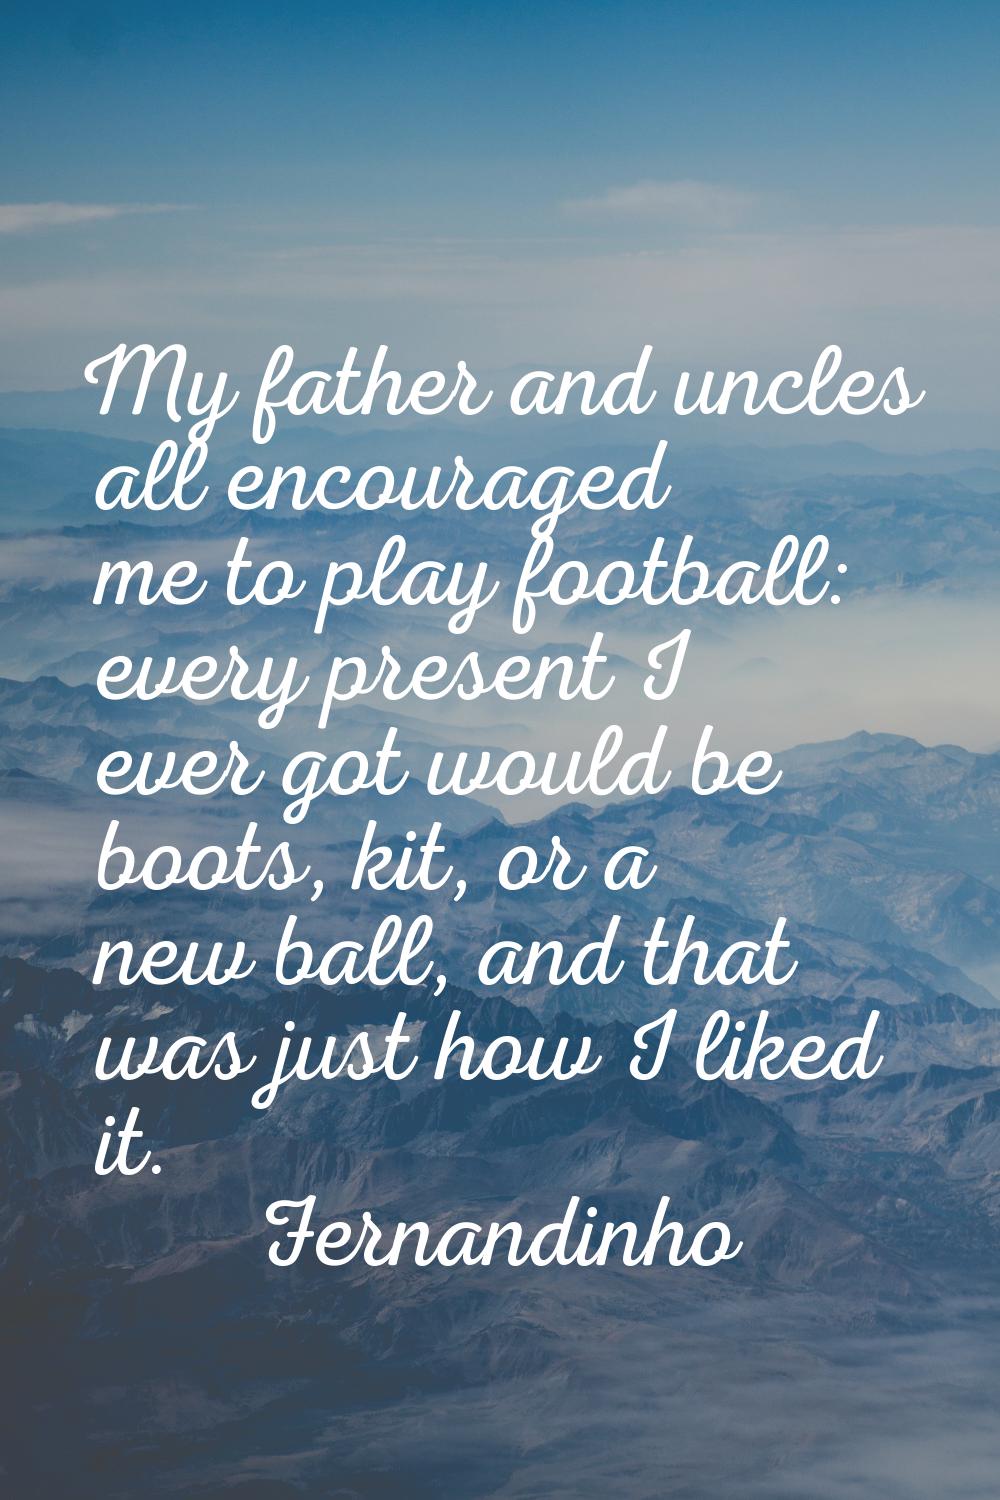 My father and uncles all encouraged me to play football: every present I ever got would be boots, k